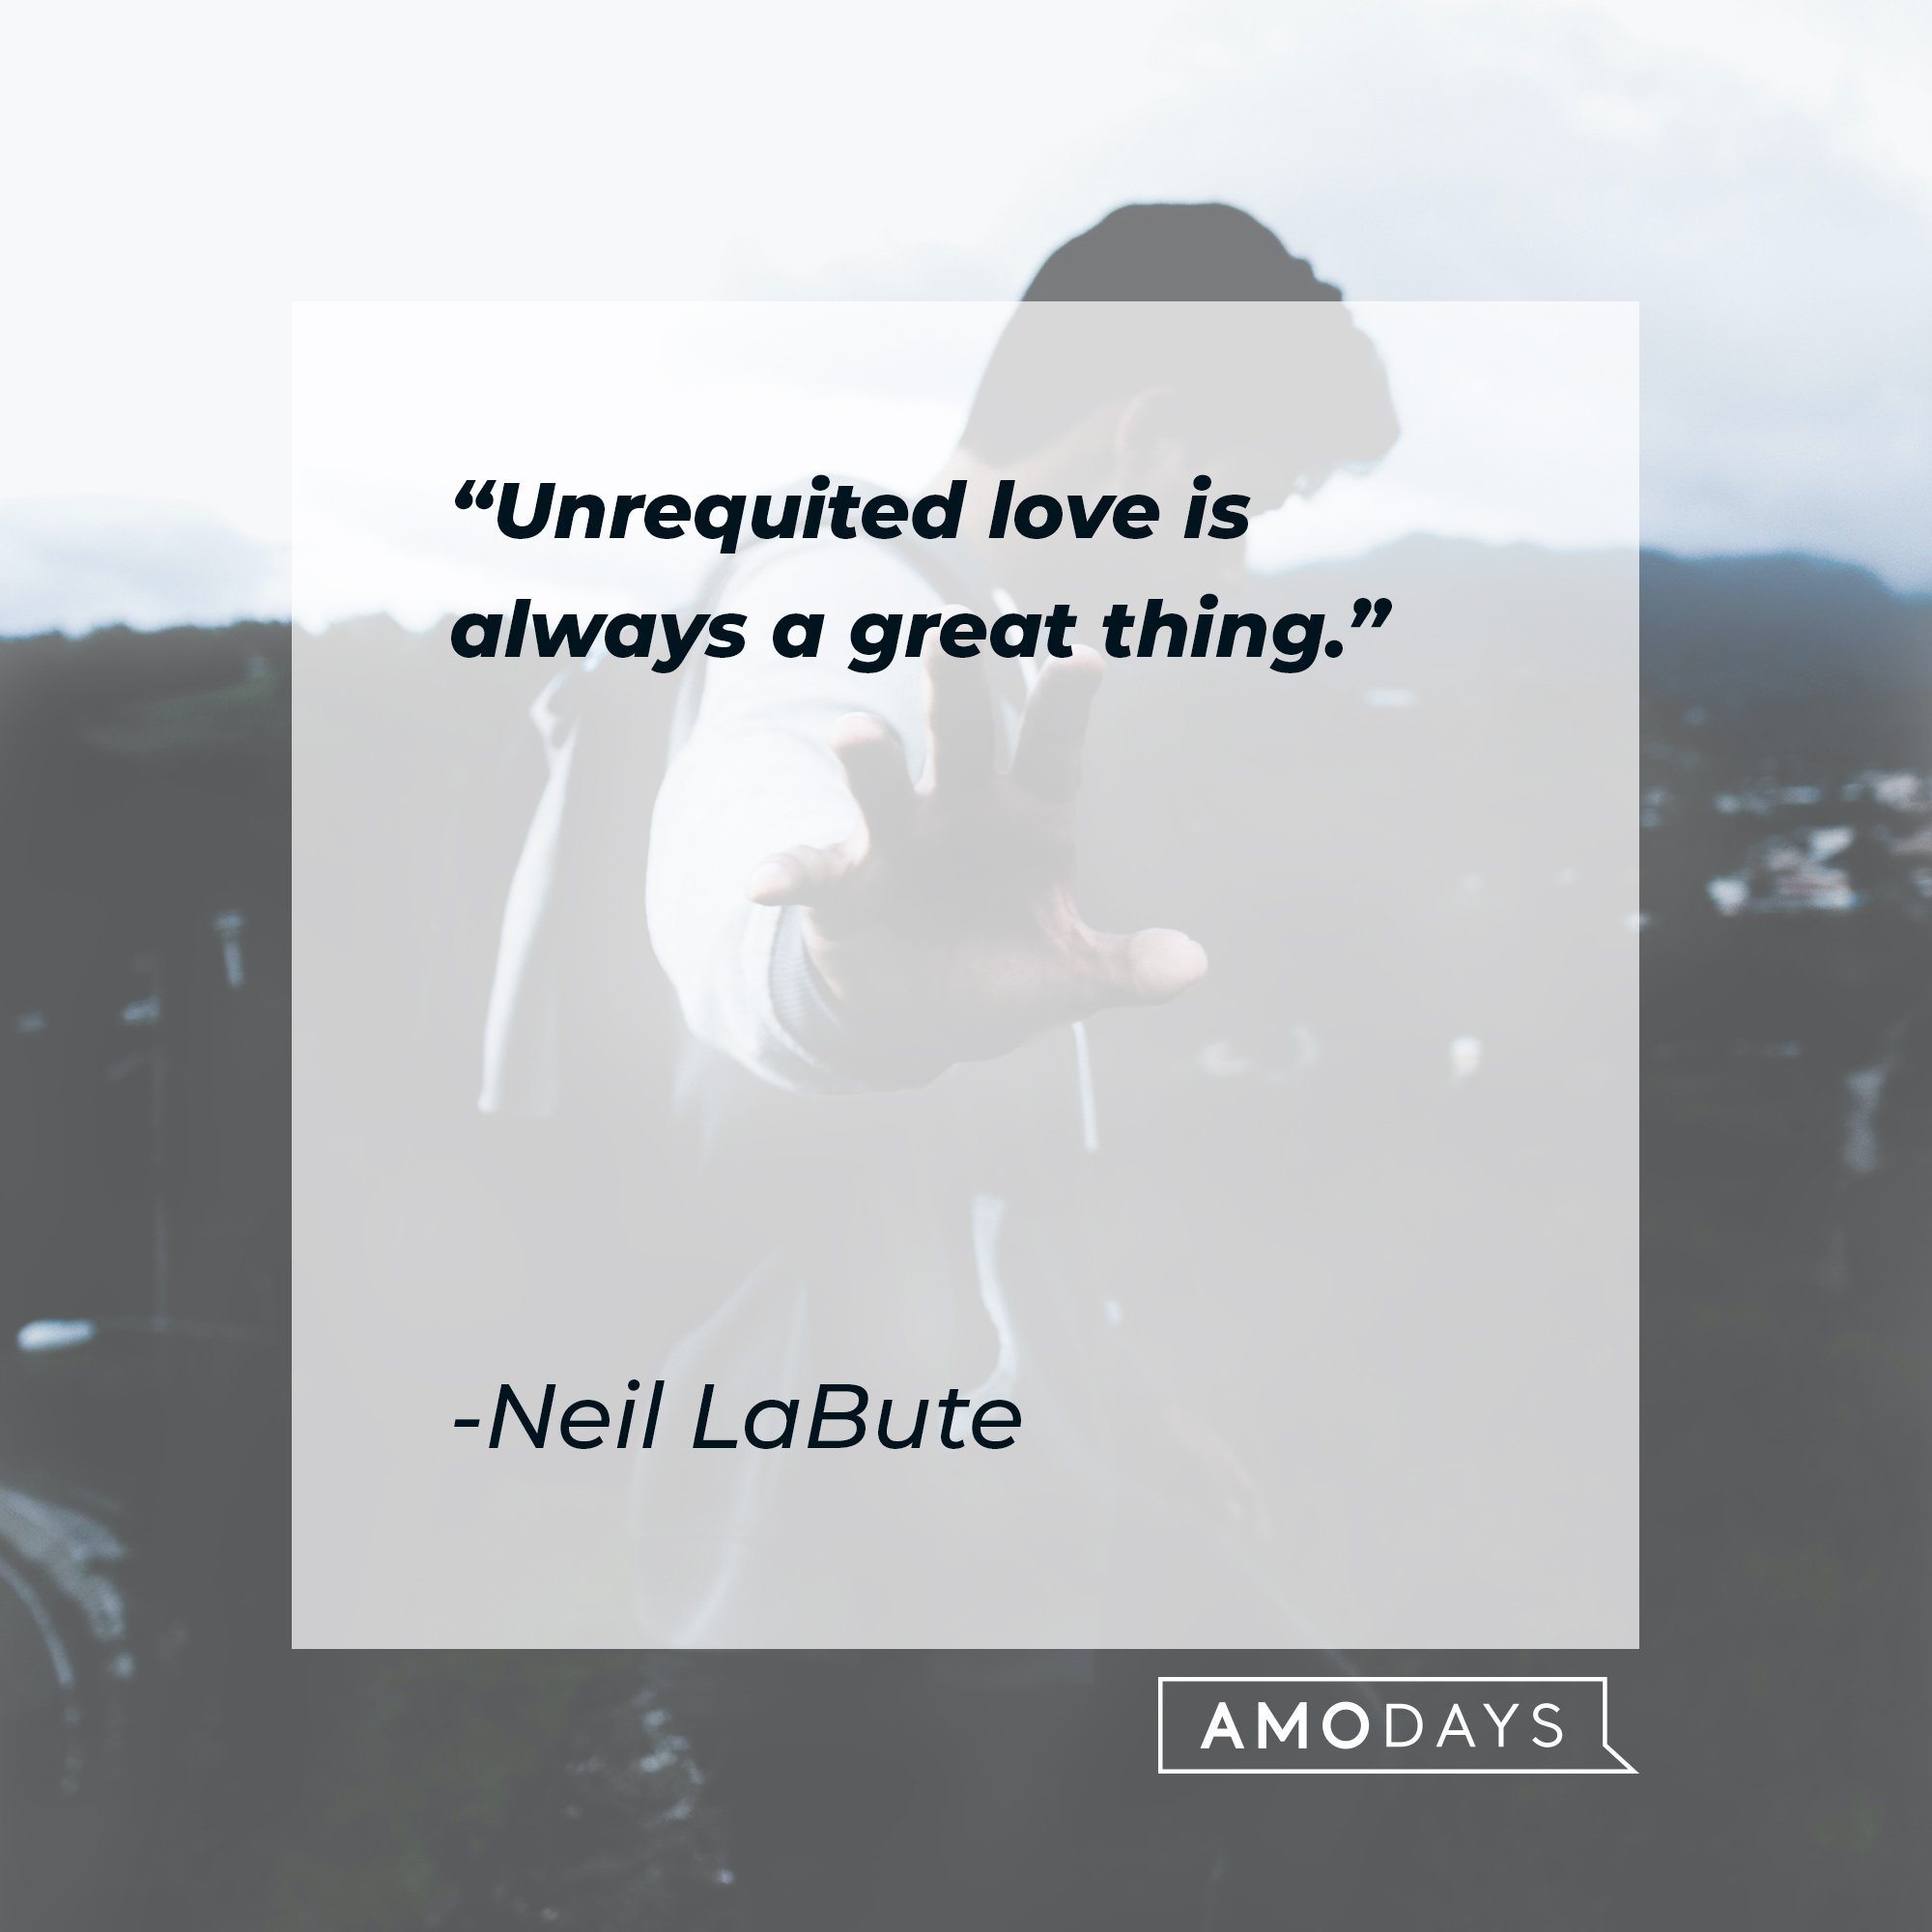 Neil LaBute's quote: "Unrequited love is always a great thing." | Image: AmoDays